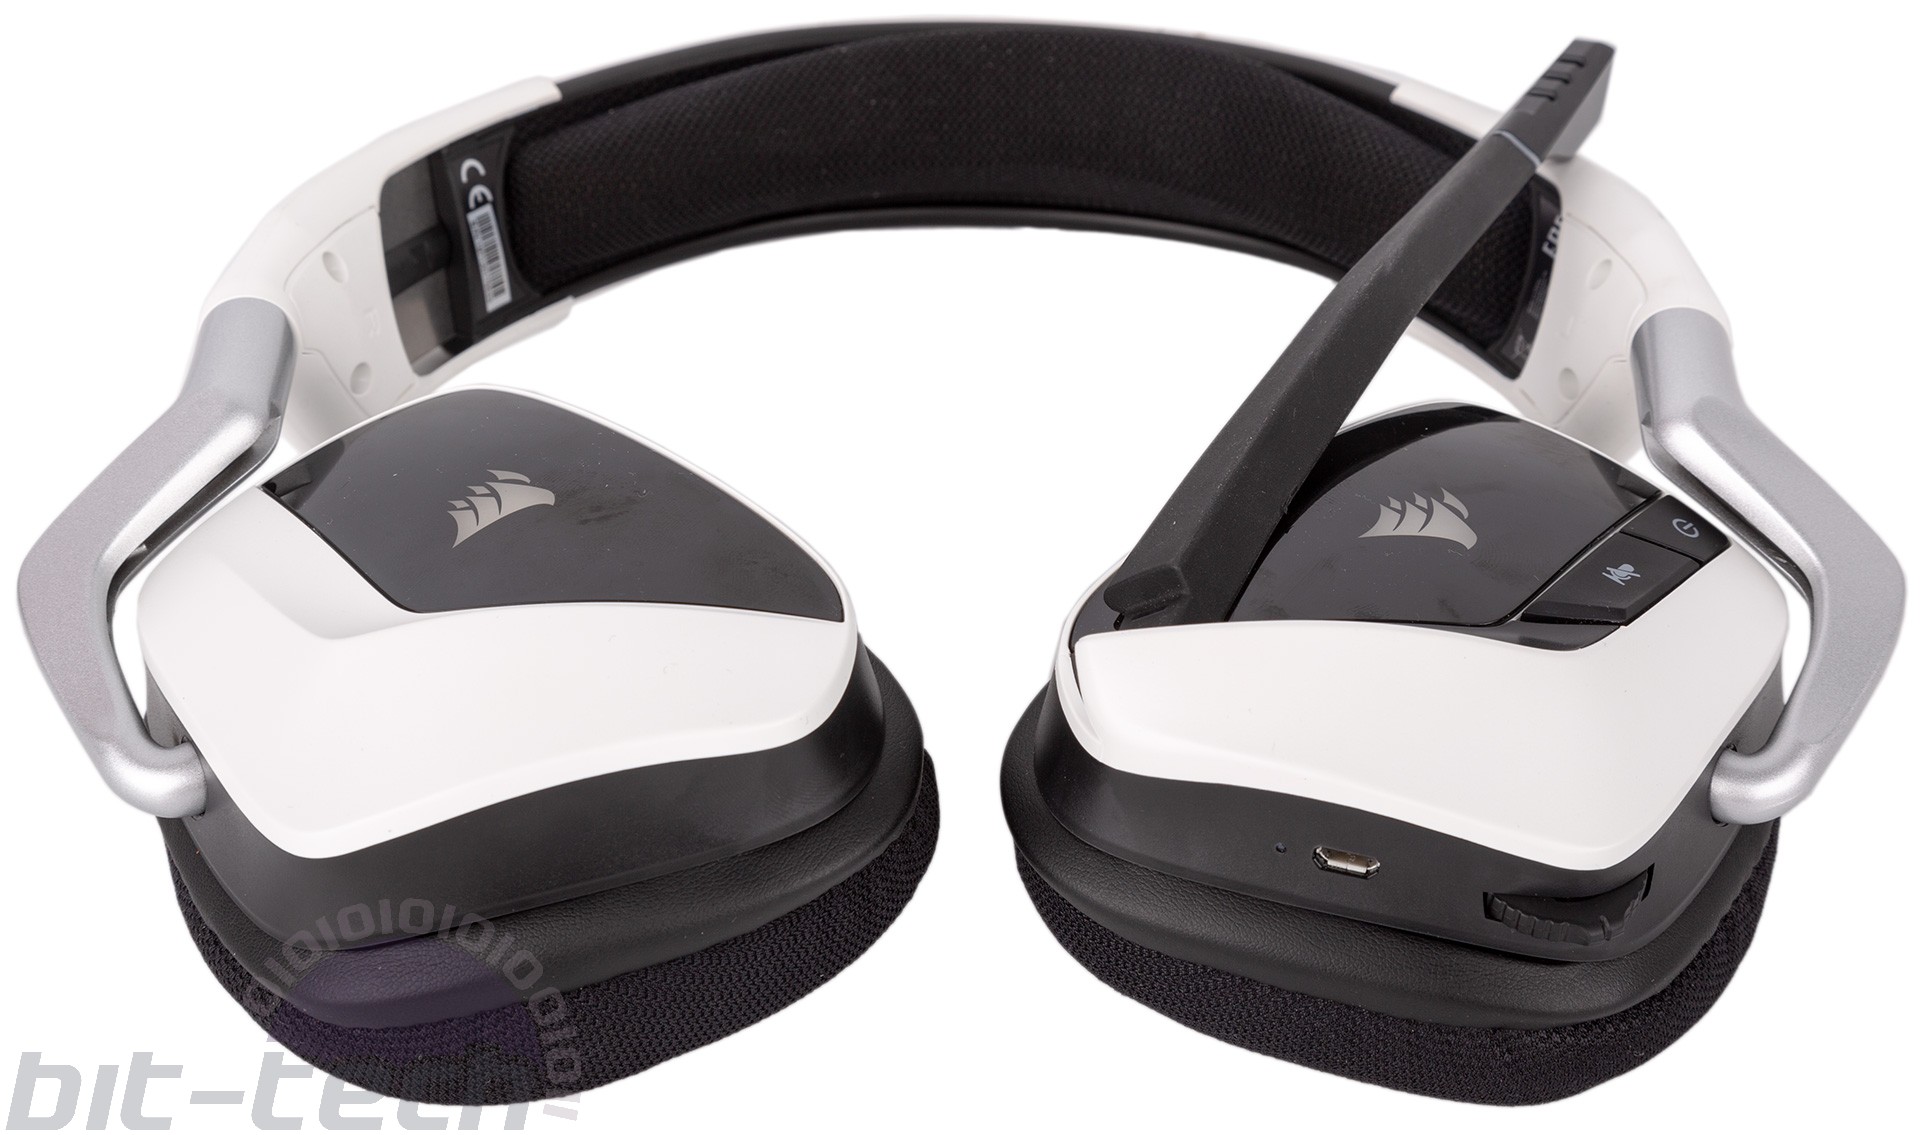 Corsair Virtuoso RGB SE review: Finally a fancy headset to match the rest  of Corsair's hardware